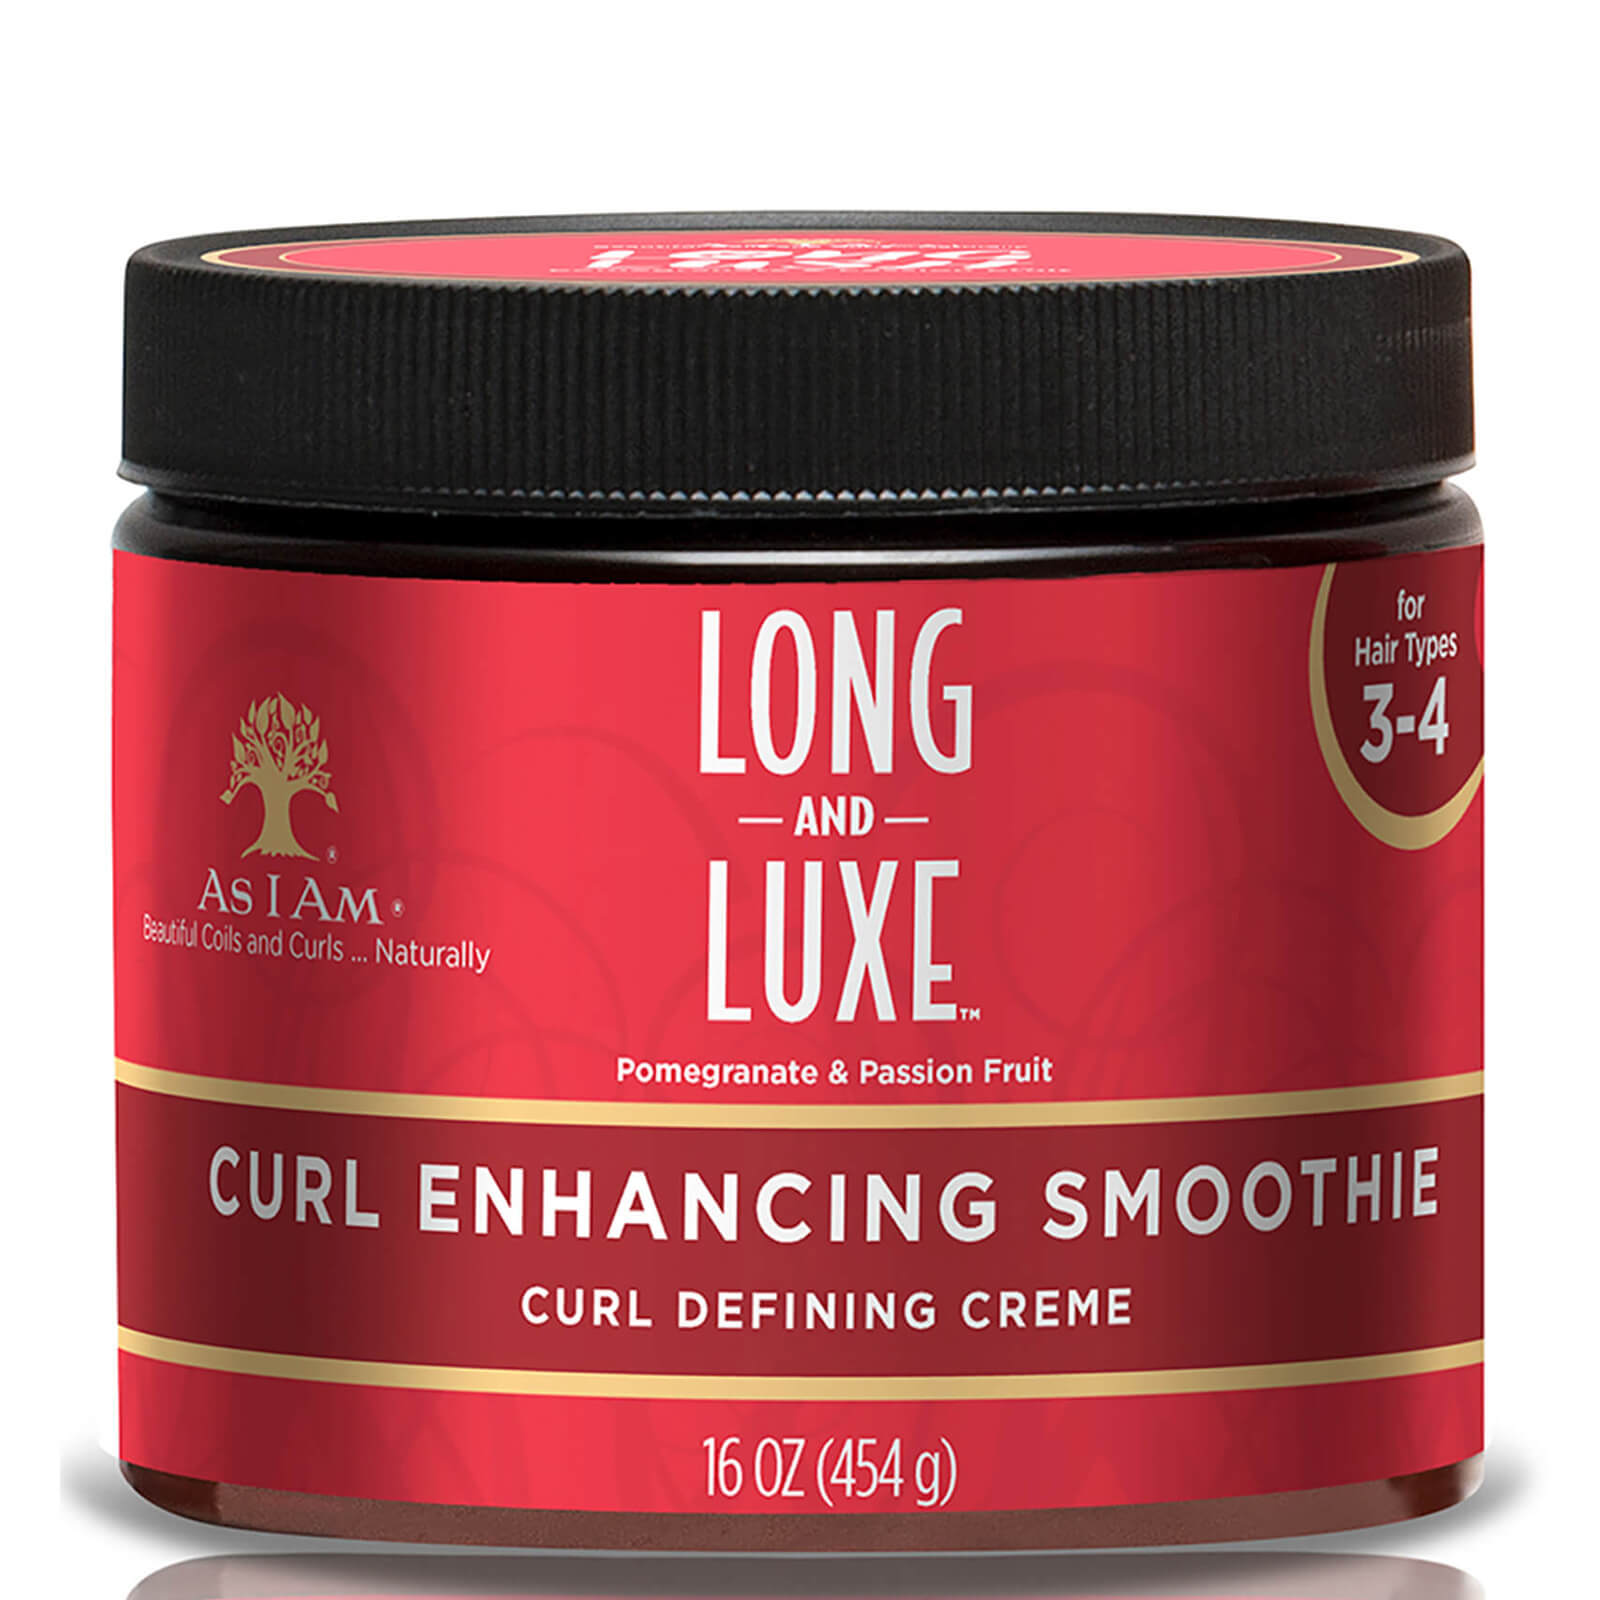 Image of As I Am Long and Luxe Curl Enhancing Smoothie crema definizione ricci 454 g